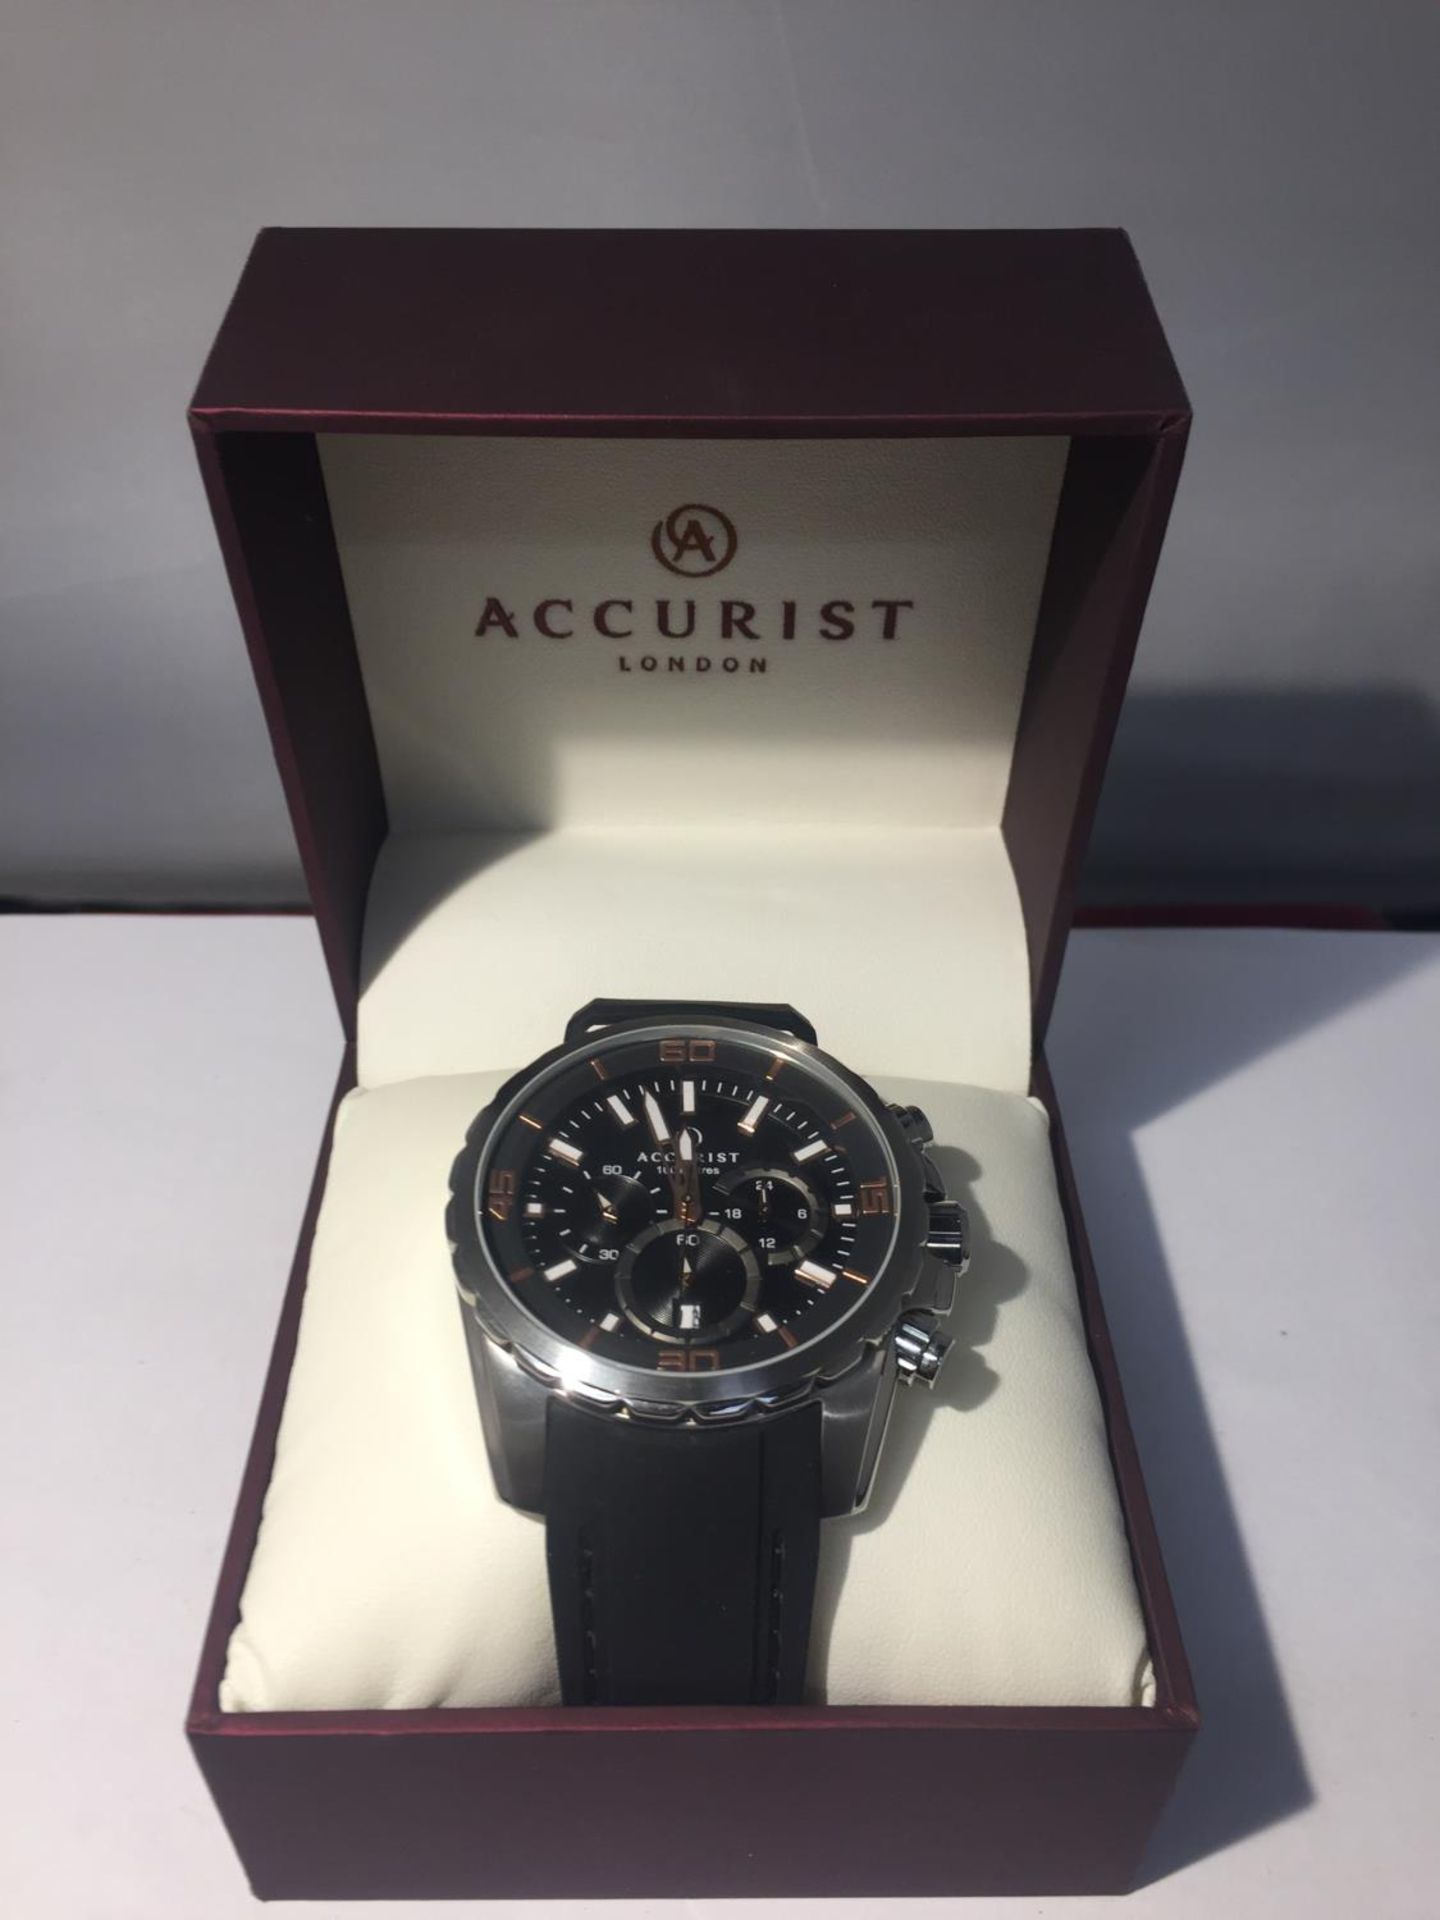 A NEW AND BOXED ACCURIST CHRONOGRAPH WRISTWATCH IN WORKING ORDER - Image 2 of 5